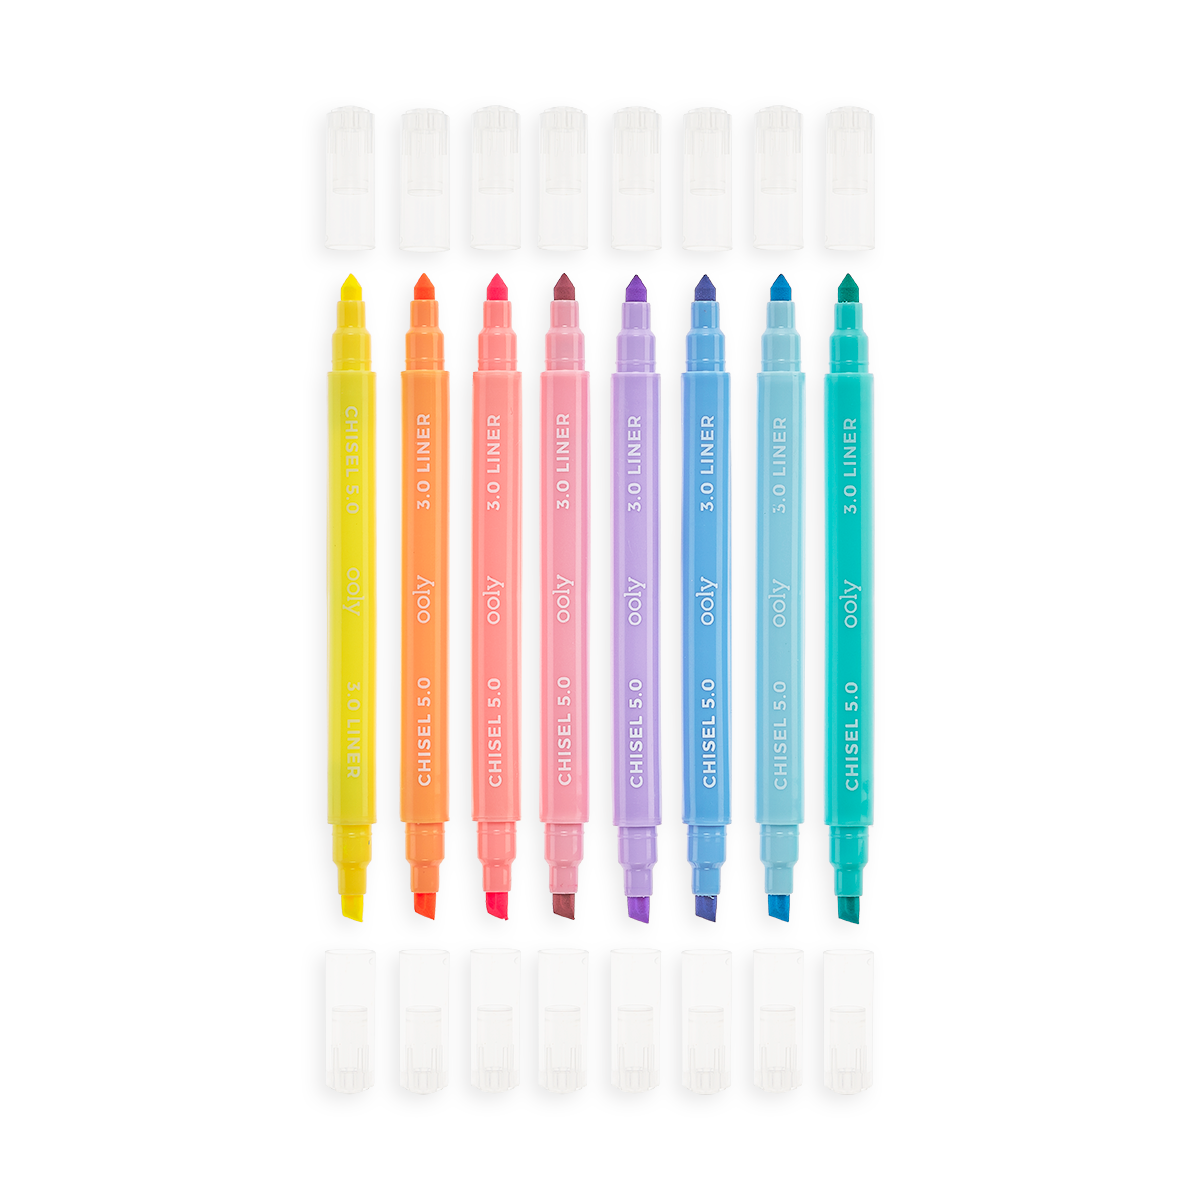 Color Layers Double Ended Layering Markers - Set of 8 - OOLY